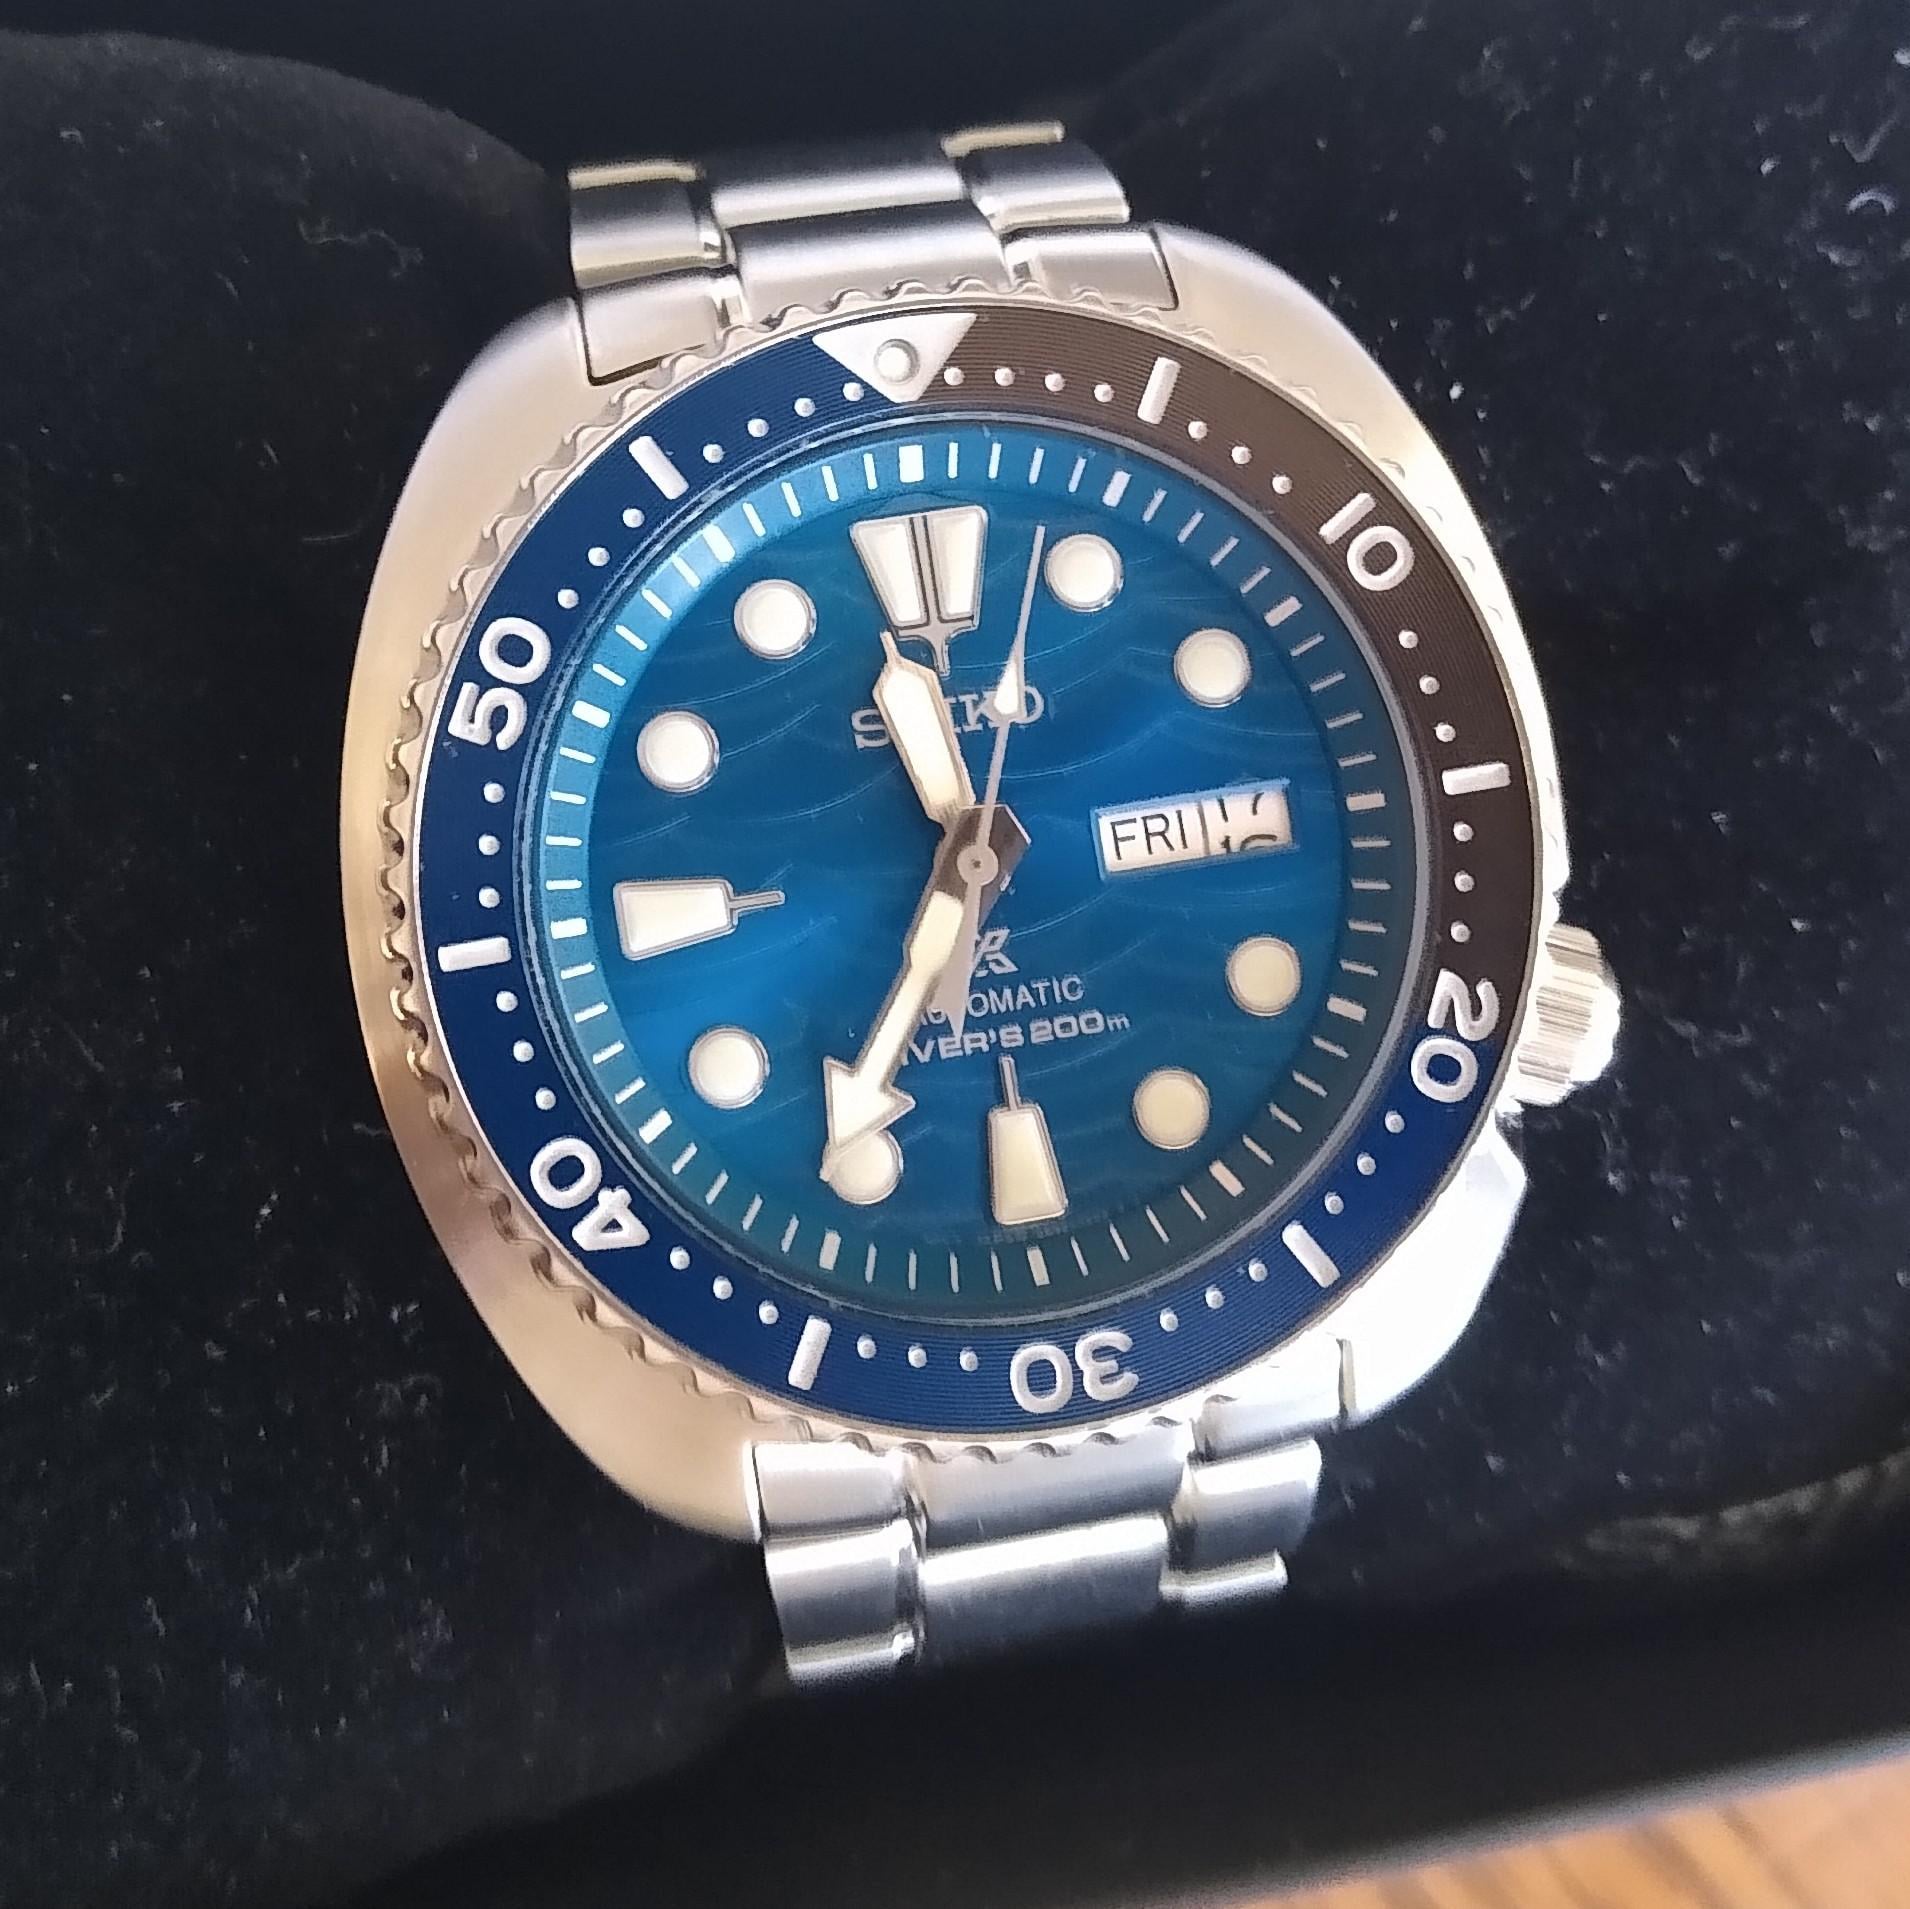 WTS] Repost and Price Drop Seiko Prospex Turtle STO SRPD21 - $280 Shipped |  WatchCharts